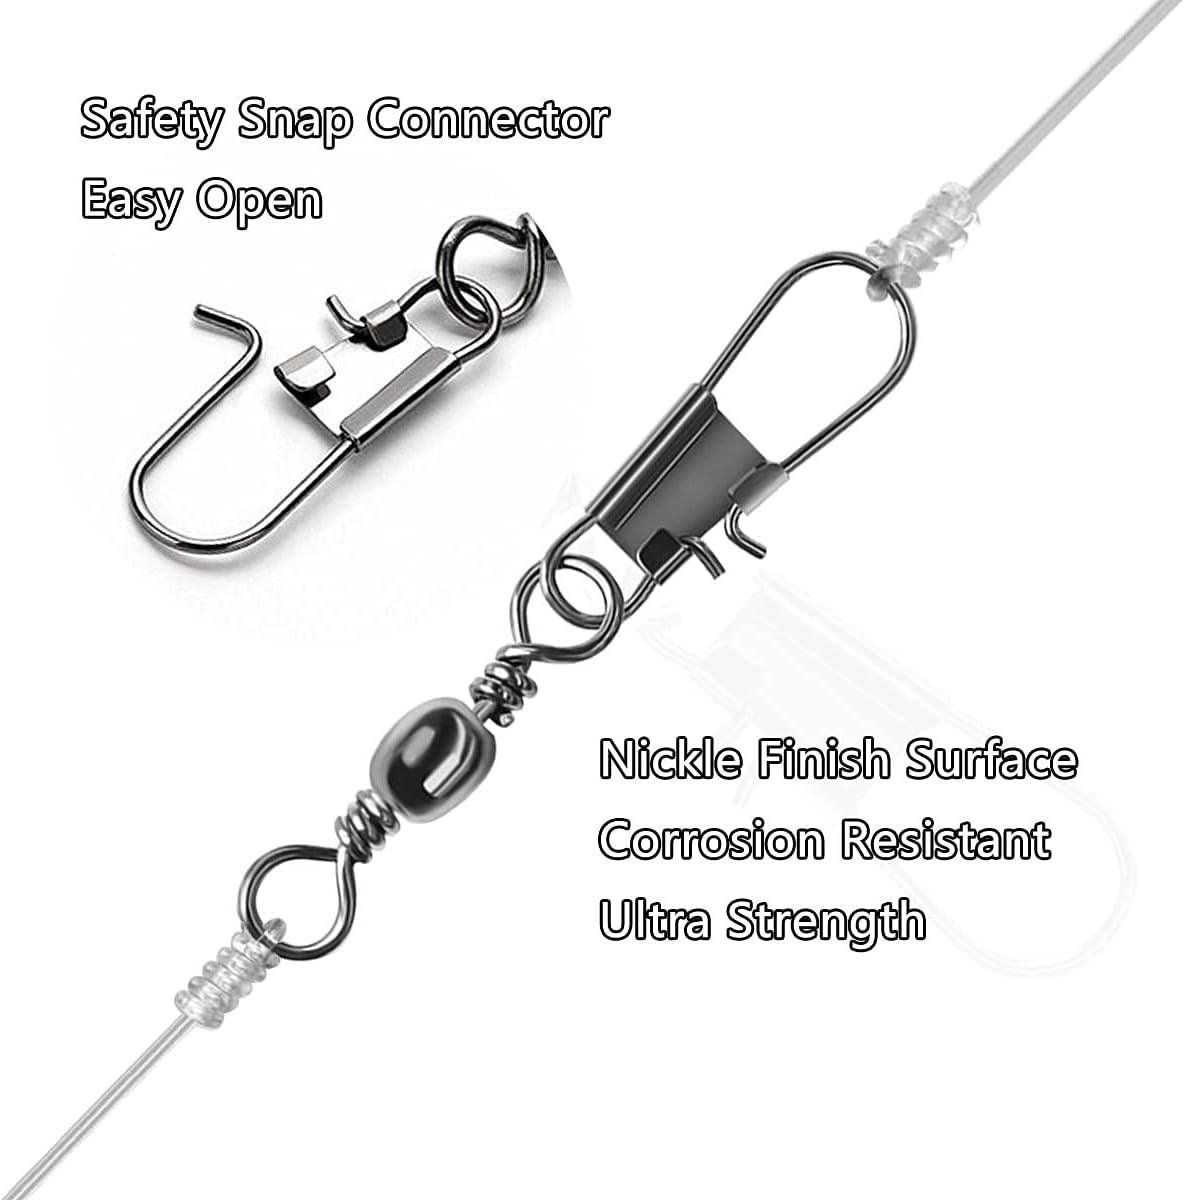 LOCK SNAP SWIVEL Rings Safety Snaps Fishing Connector Pack (72